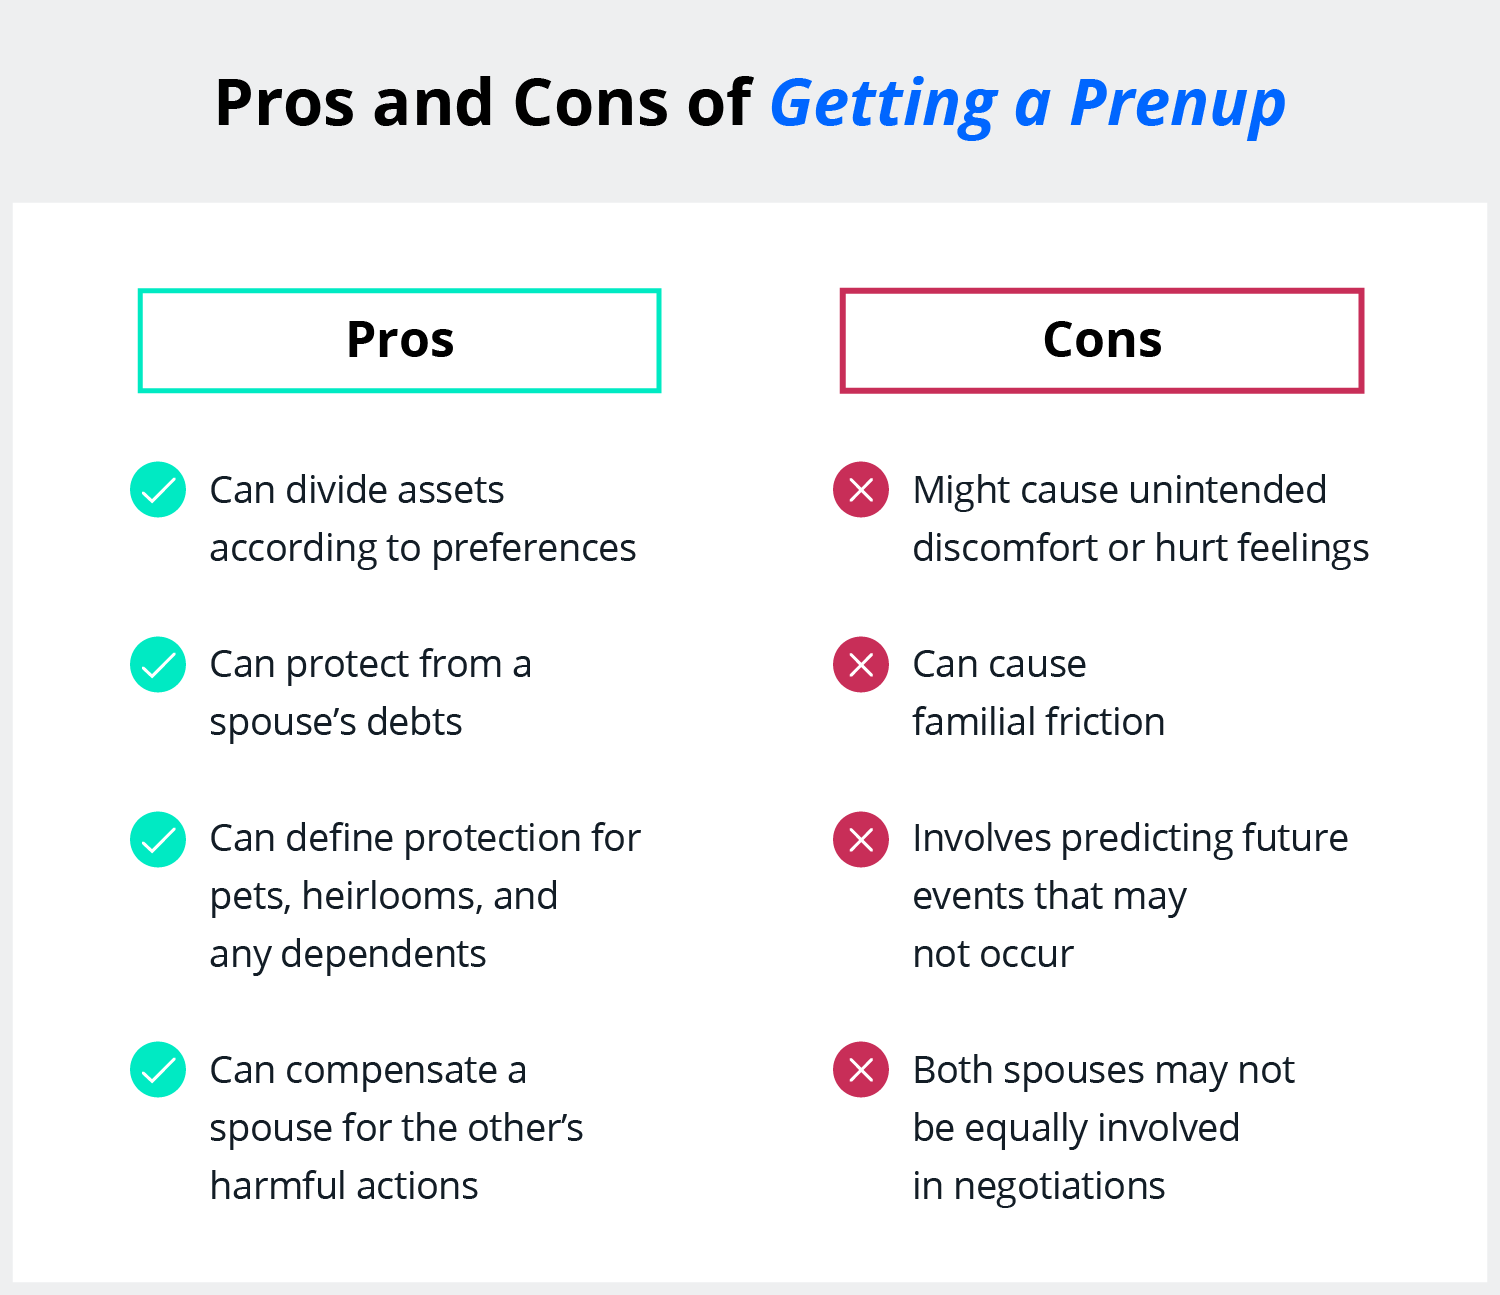 A checklist shows pros and cons of getting a prenup. Pros of a prenup are that it can divide assets according to each party's preferences, protect from a spouse's debts, define protection for pets, heirlooms, and dependents, and compensate a spouse for the other's harmful actions. Cons of a prenup are that it might cause discomfort, hurt feelings, or familial friction, involves predicting future events that may not occur, and can be created without the total involvement of each spouse.